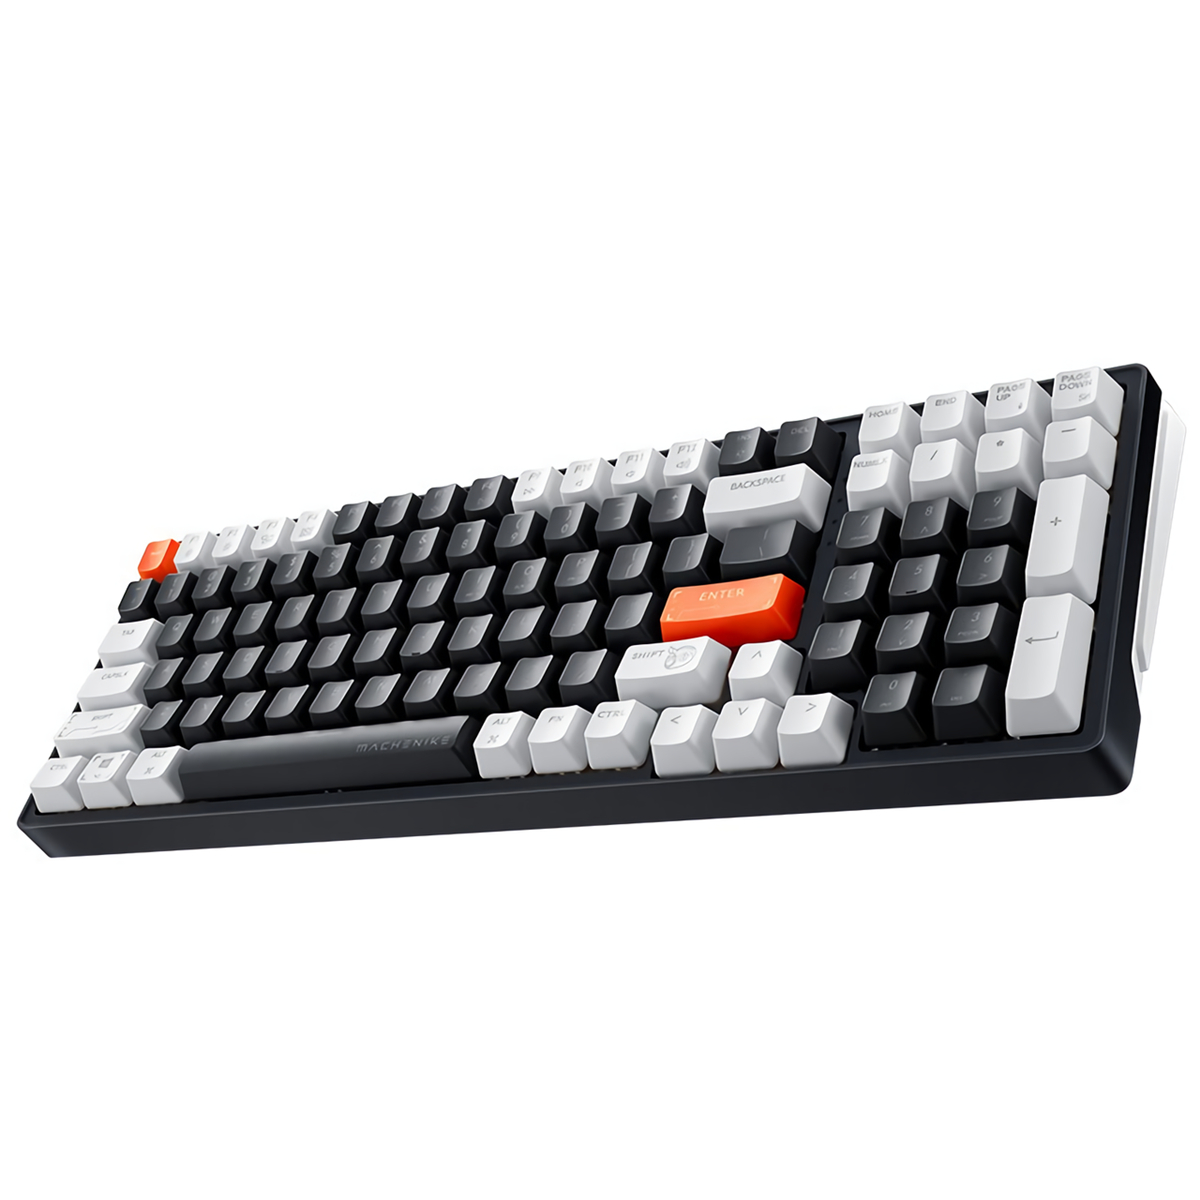 Find MACHENIKE K600 Mechanical Gaming Keyboard Dual Mode Type C Wired bluetooth5 0 100 Keys Translucent ABS Keycaps Kailh Blue/Brown/Red Switch White LED Backlit Ergonomic Keyboard for Sale on Gipsybee.com with cryptocurrencies